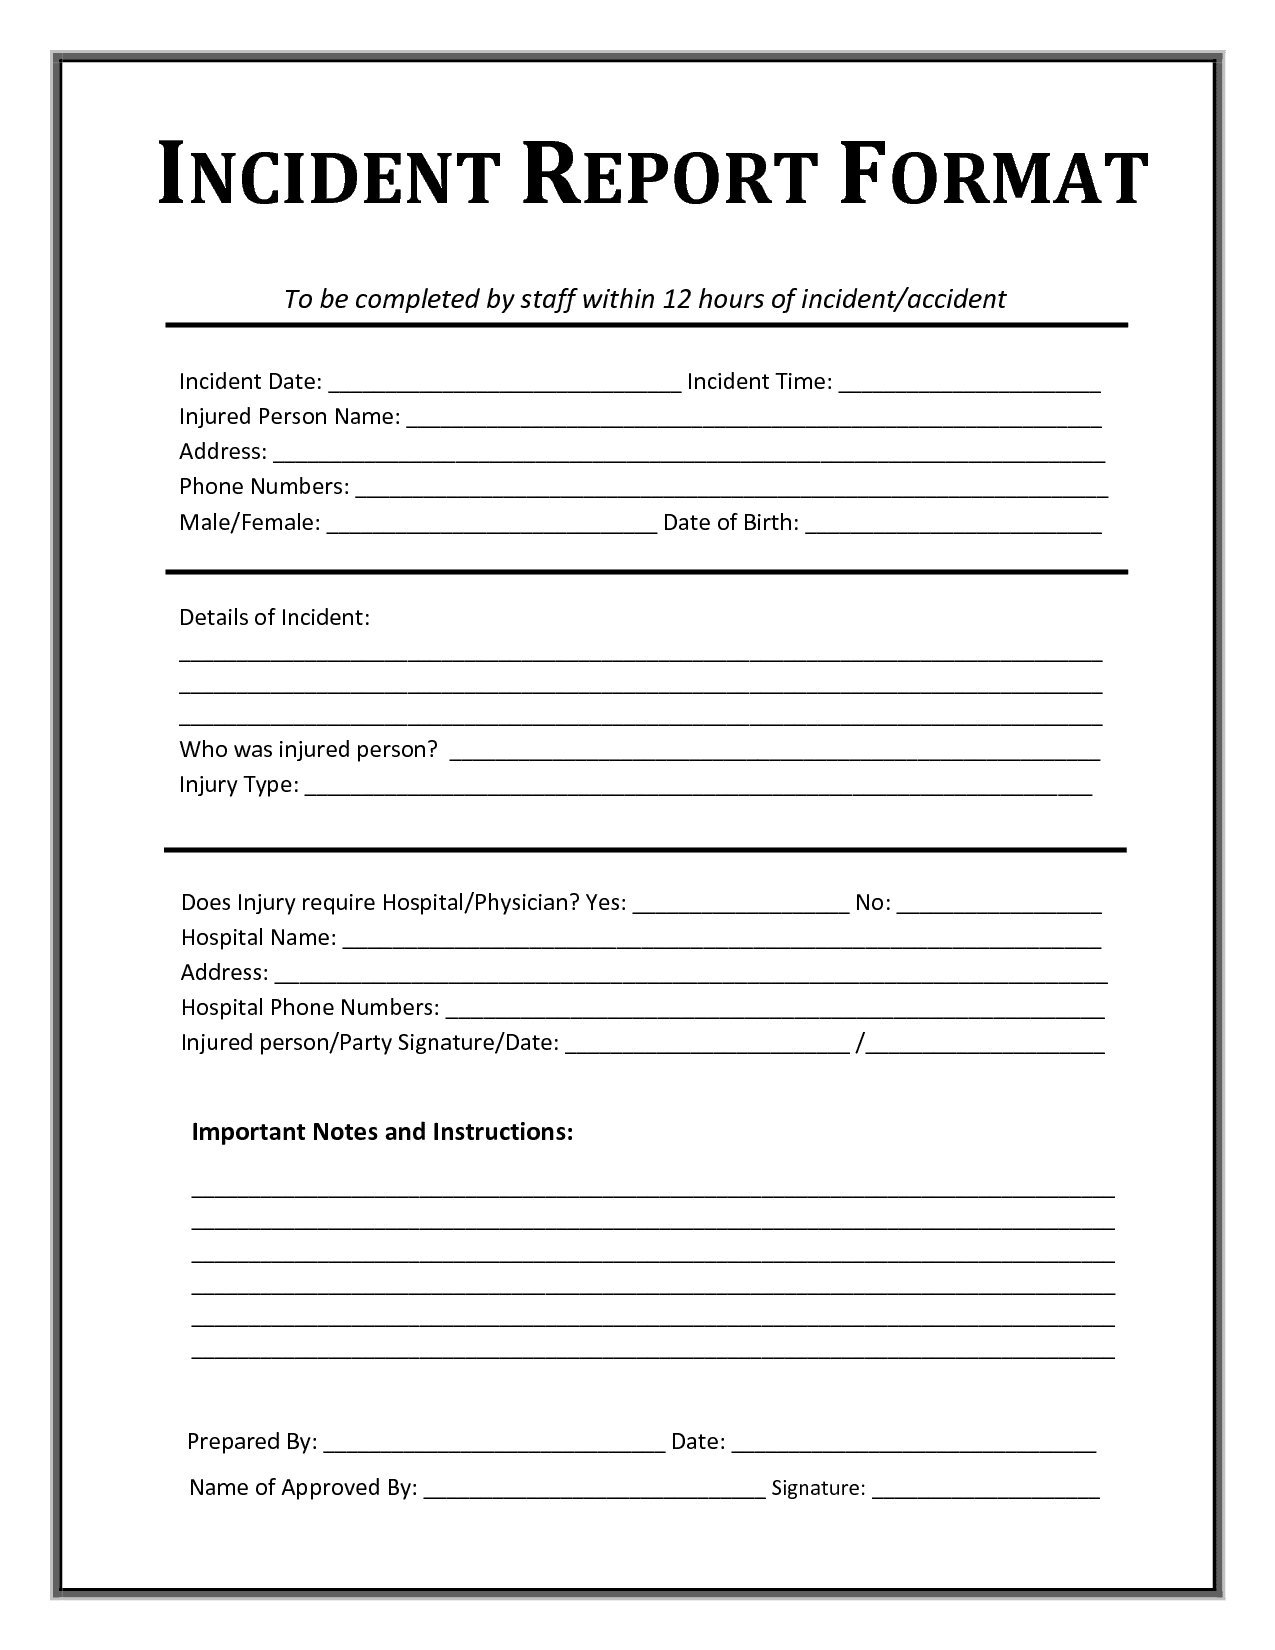 Security Incident Report Template Word And Security Incident Report Sample